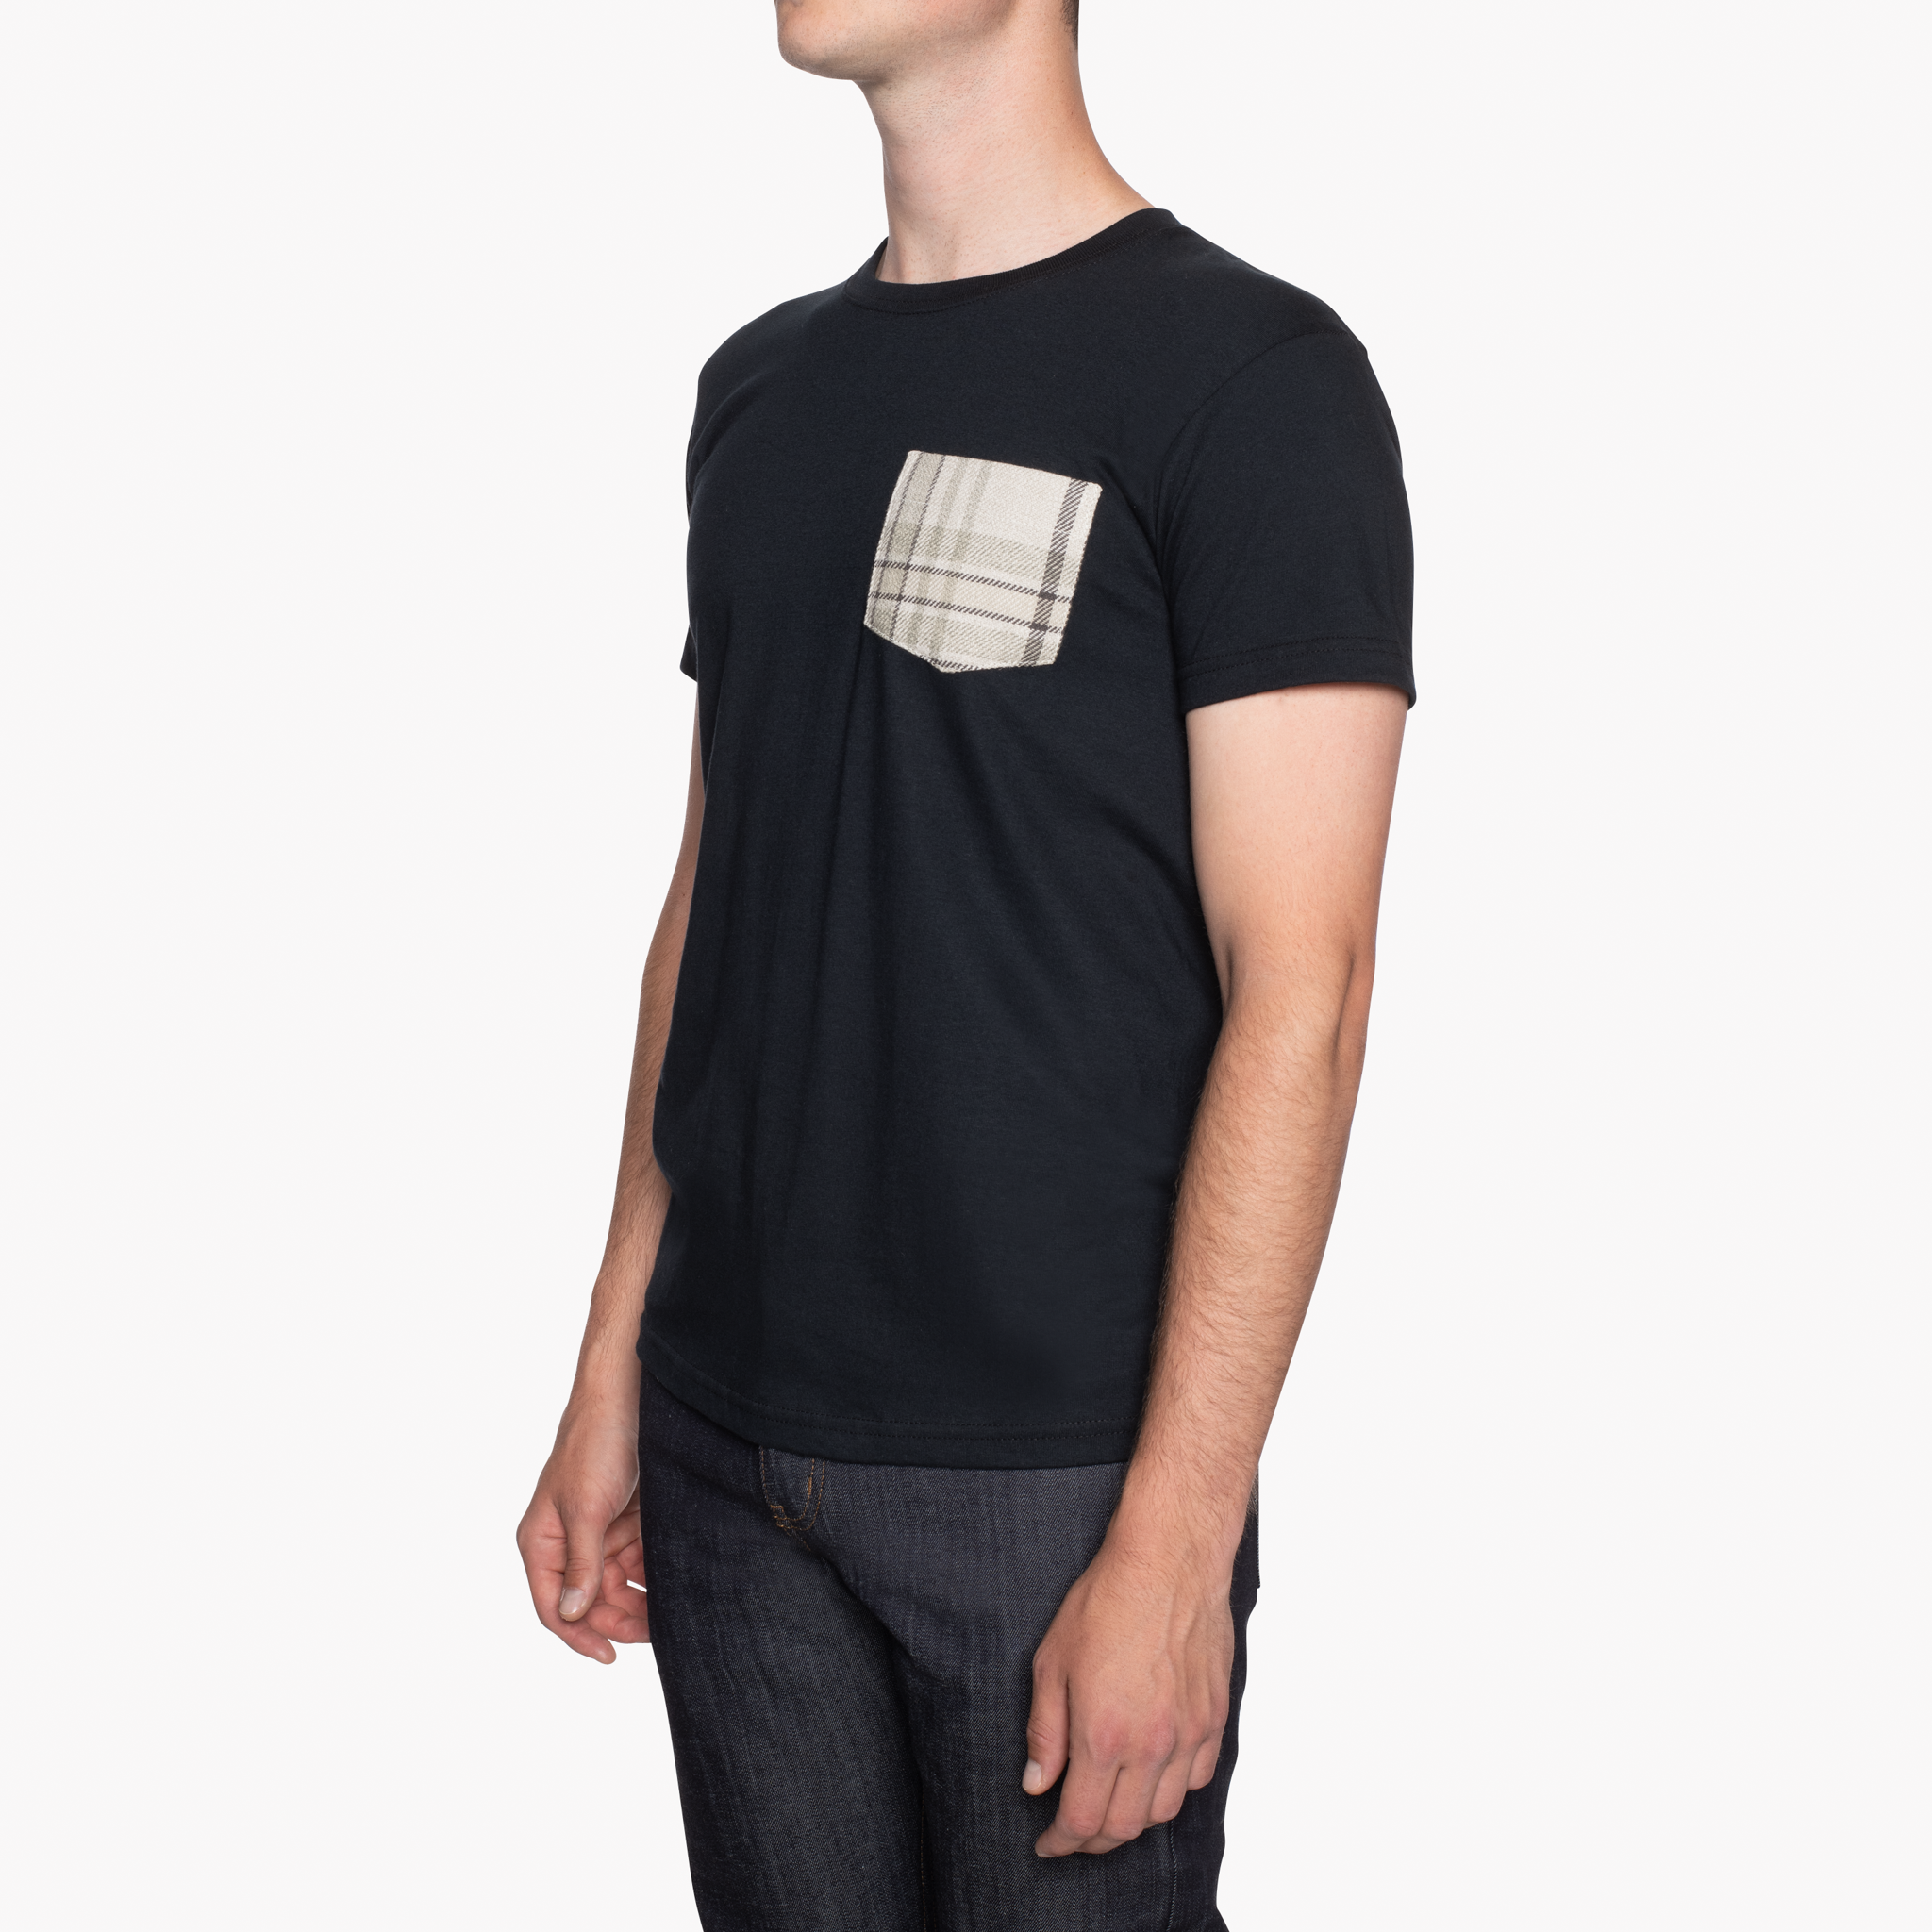  Contract Pocket Tee - Black + Heavy Vintage Flannel Pale Grey - side 